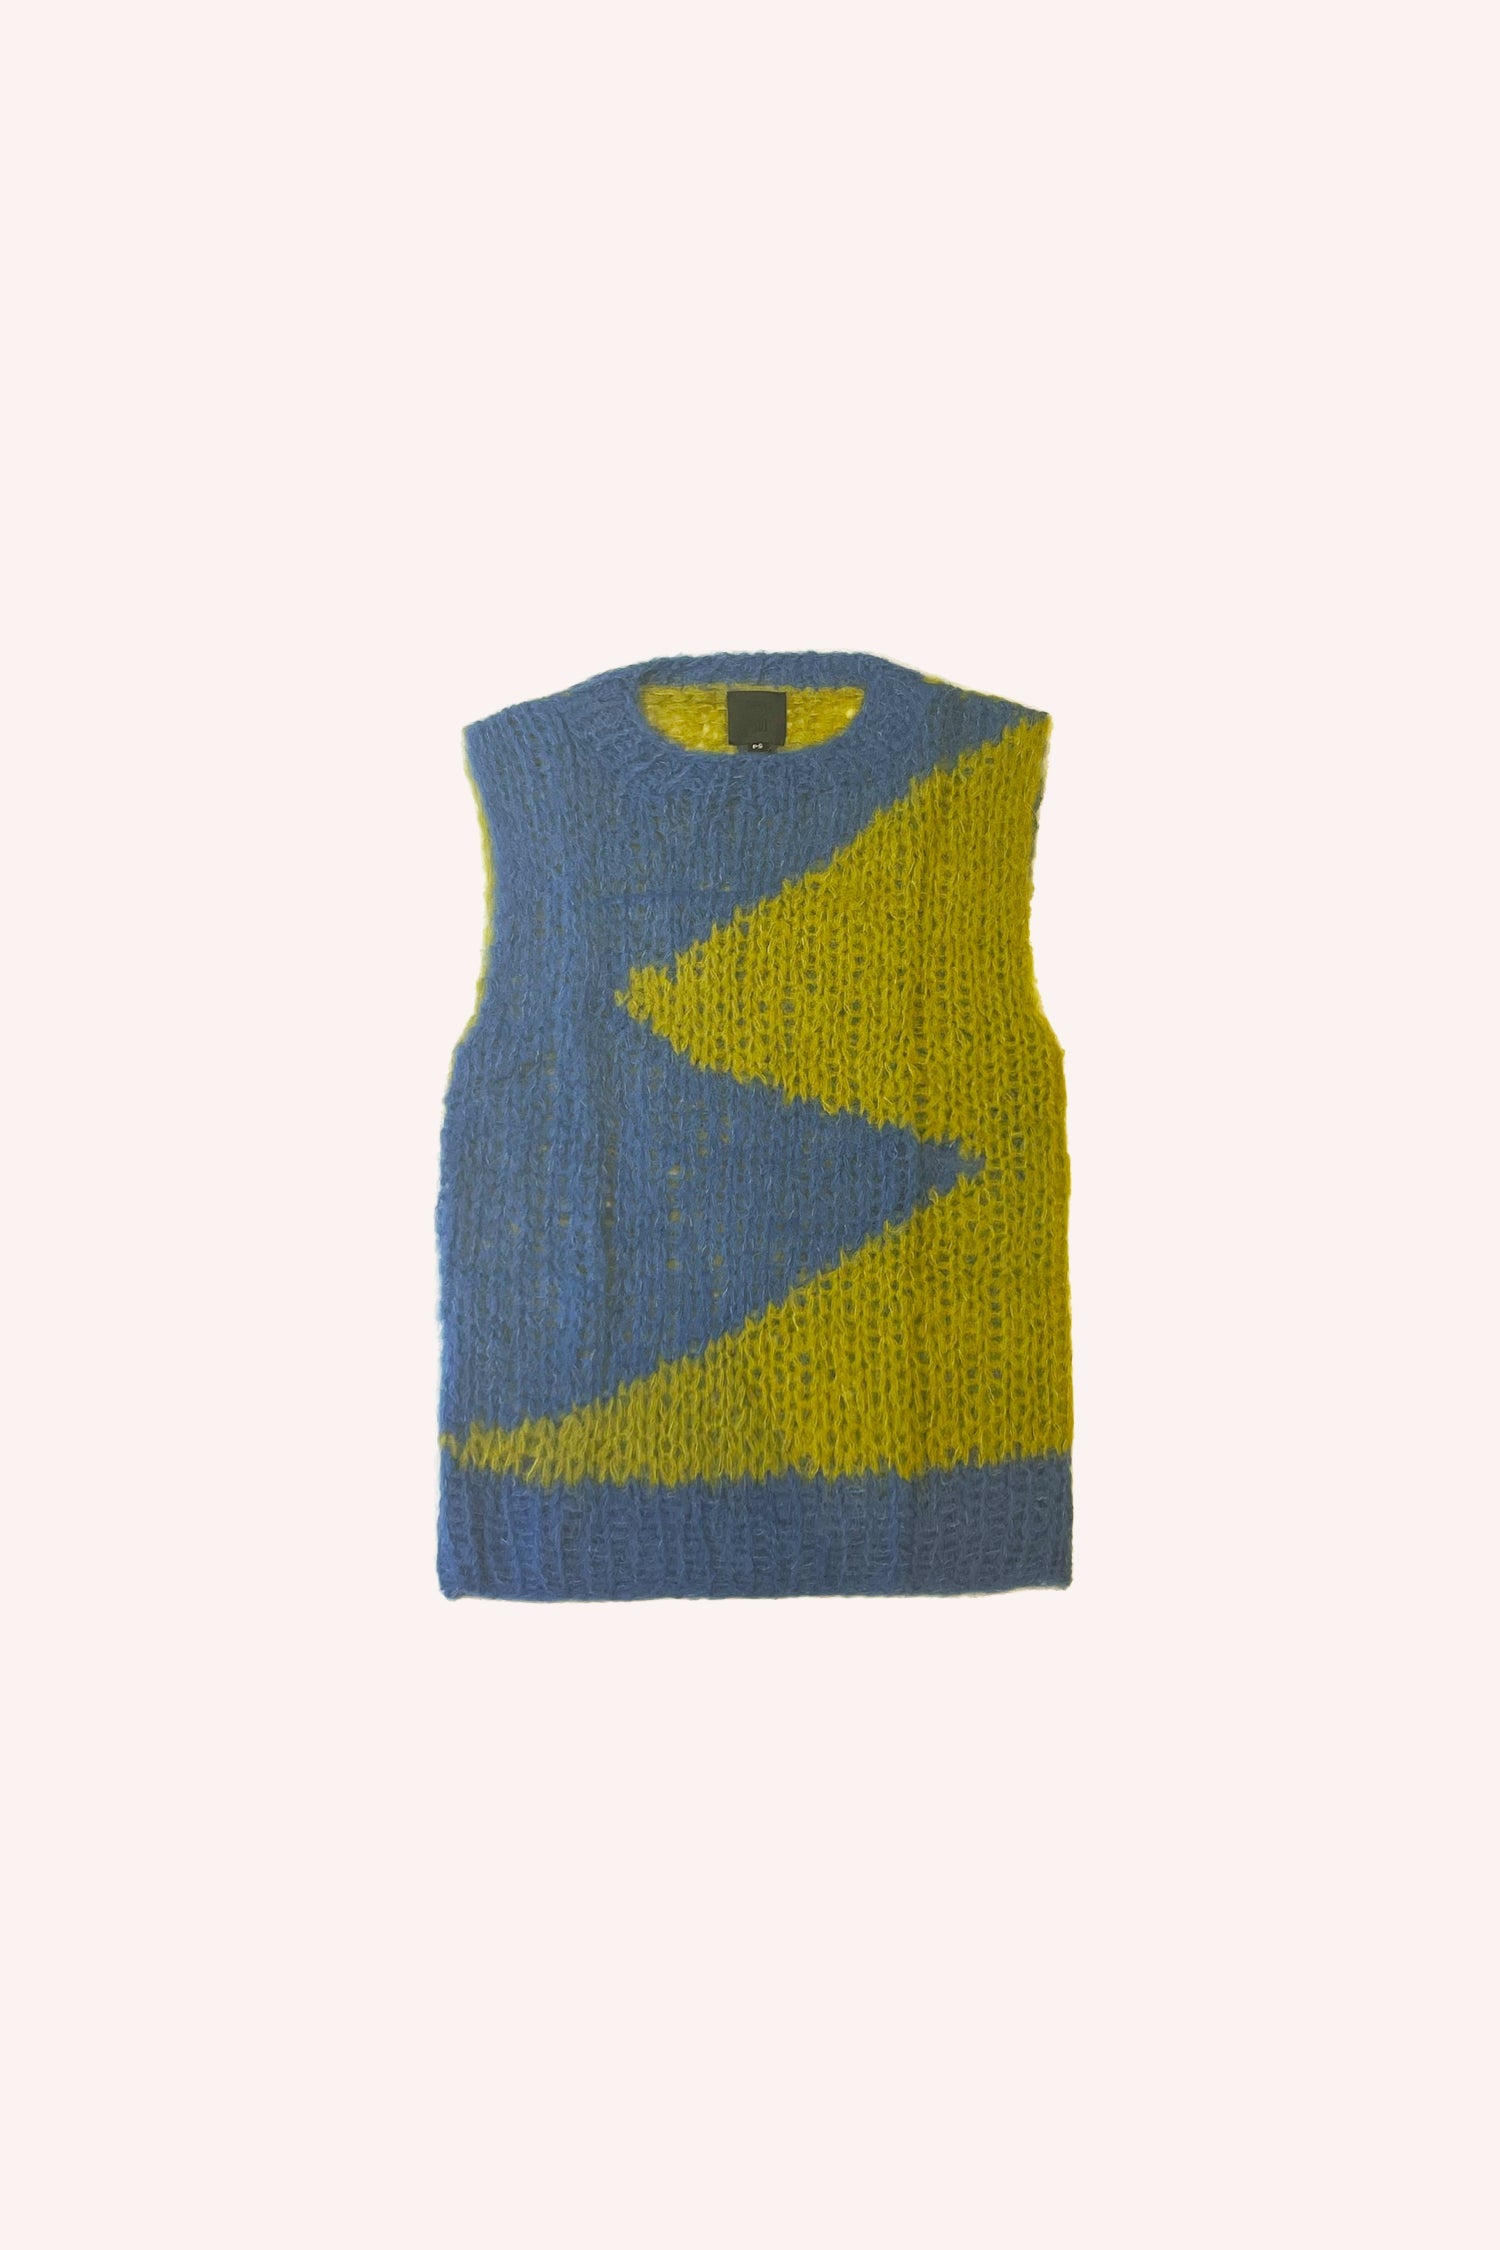 Sweater, Sleeveless, Blue & Green in triangle shape, running in opposite direction side to side